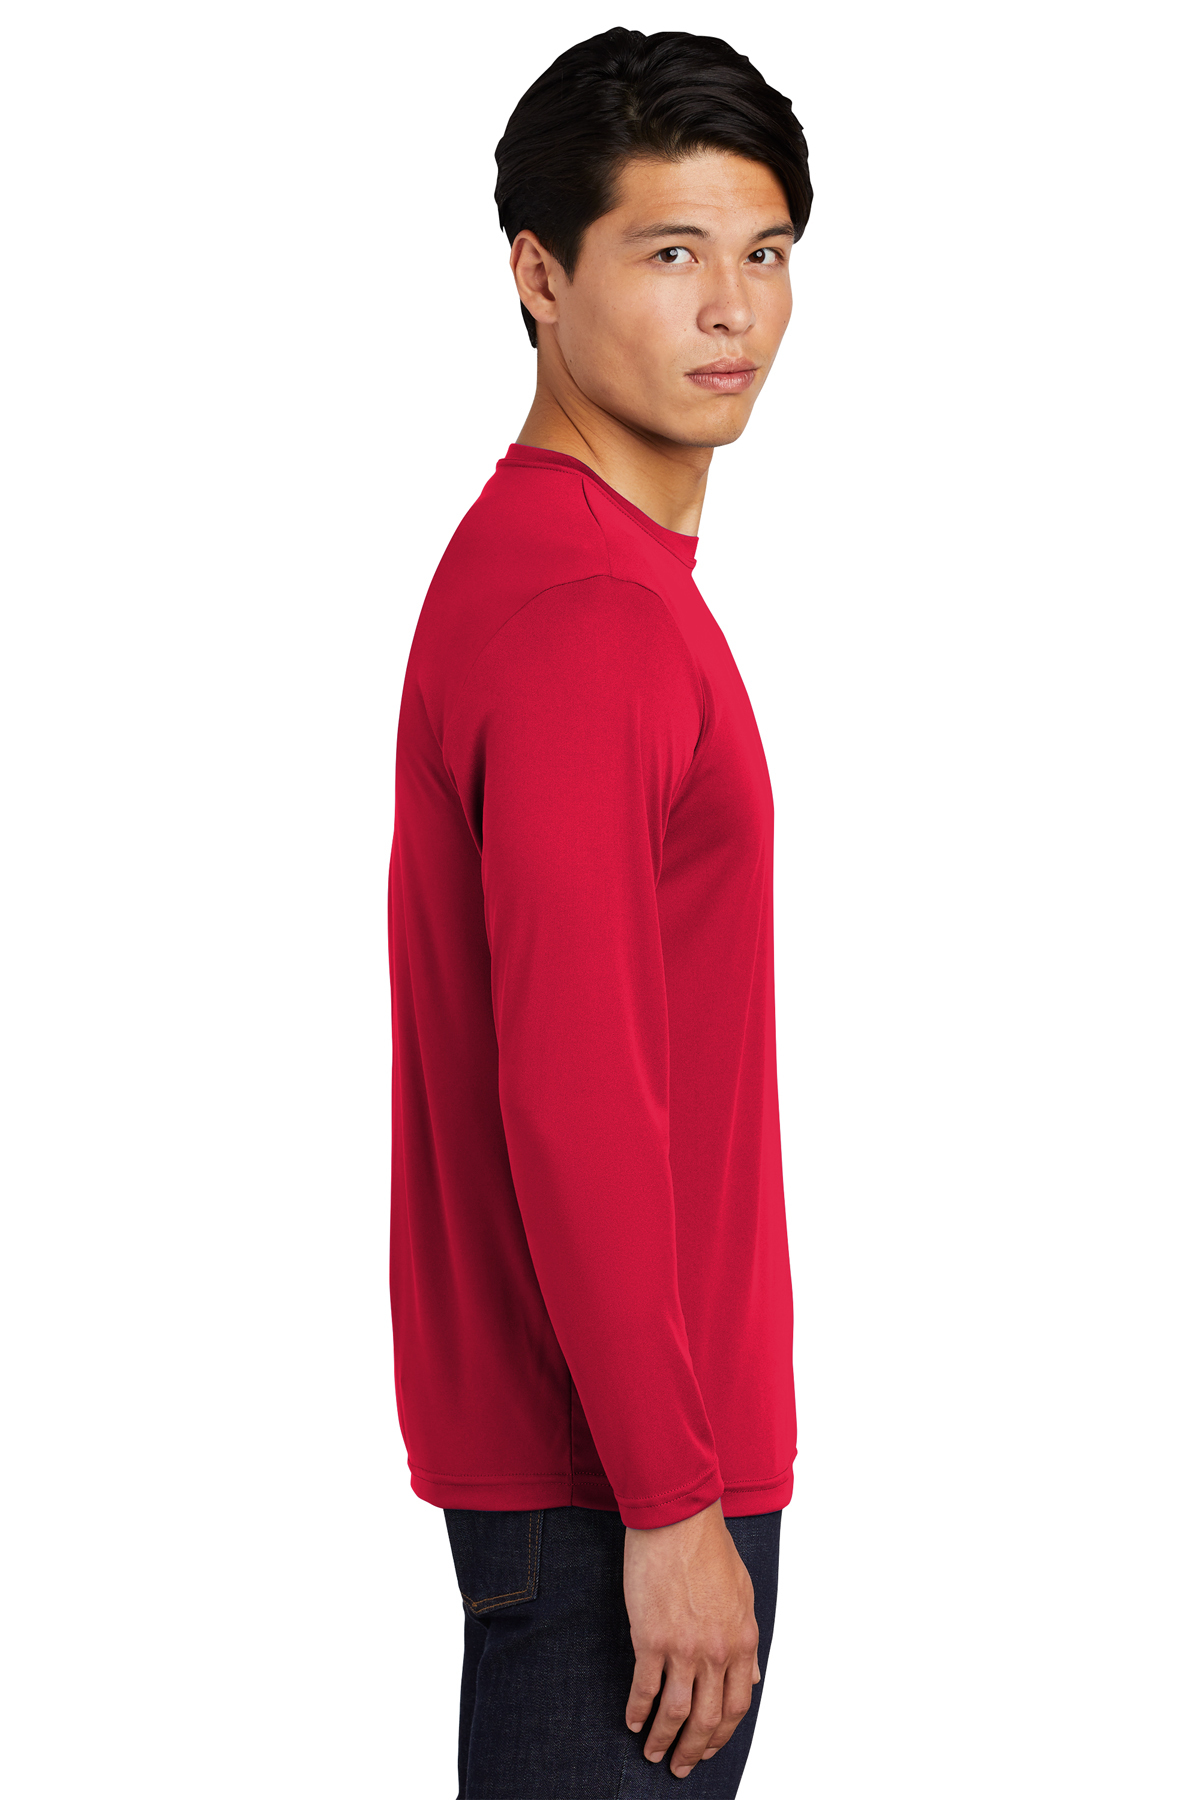 Long Sleeve Sports Tee - Style Limits